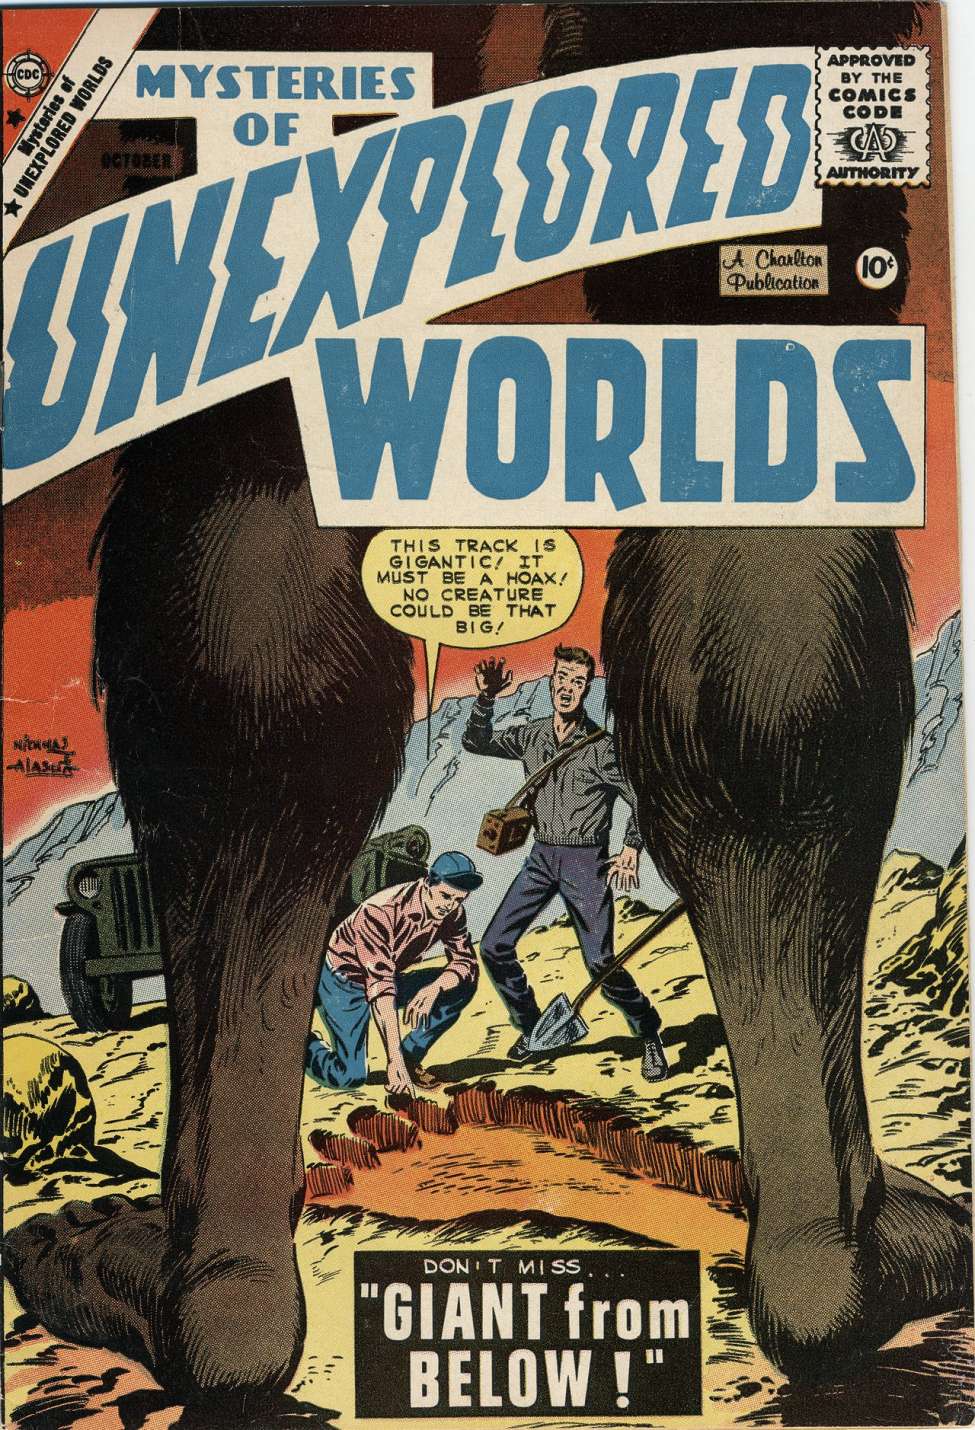 Comic Book Cover For Mysteries of Unexplored Worlds 15 (alt)